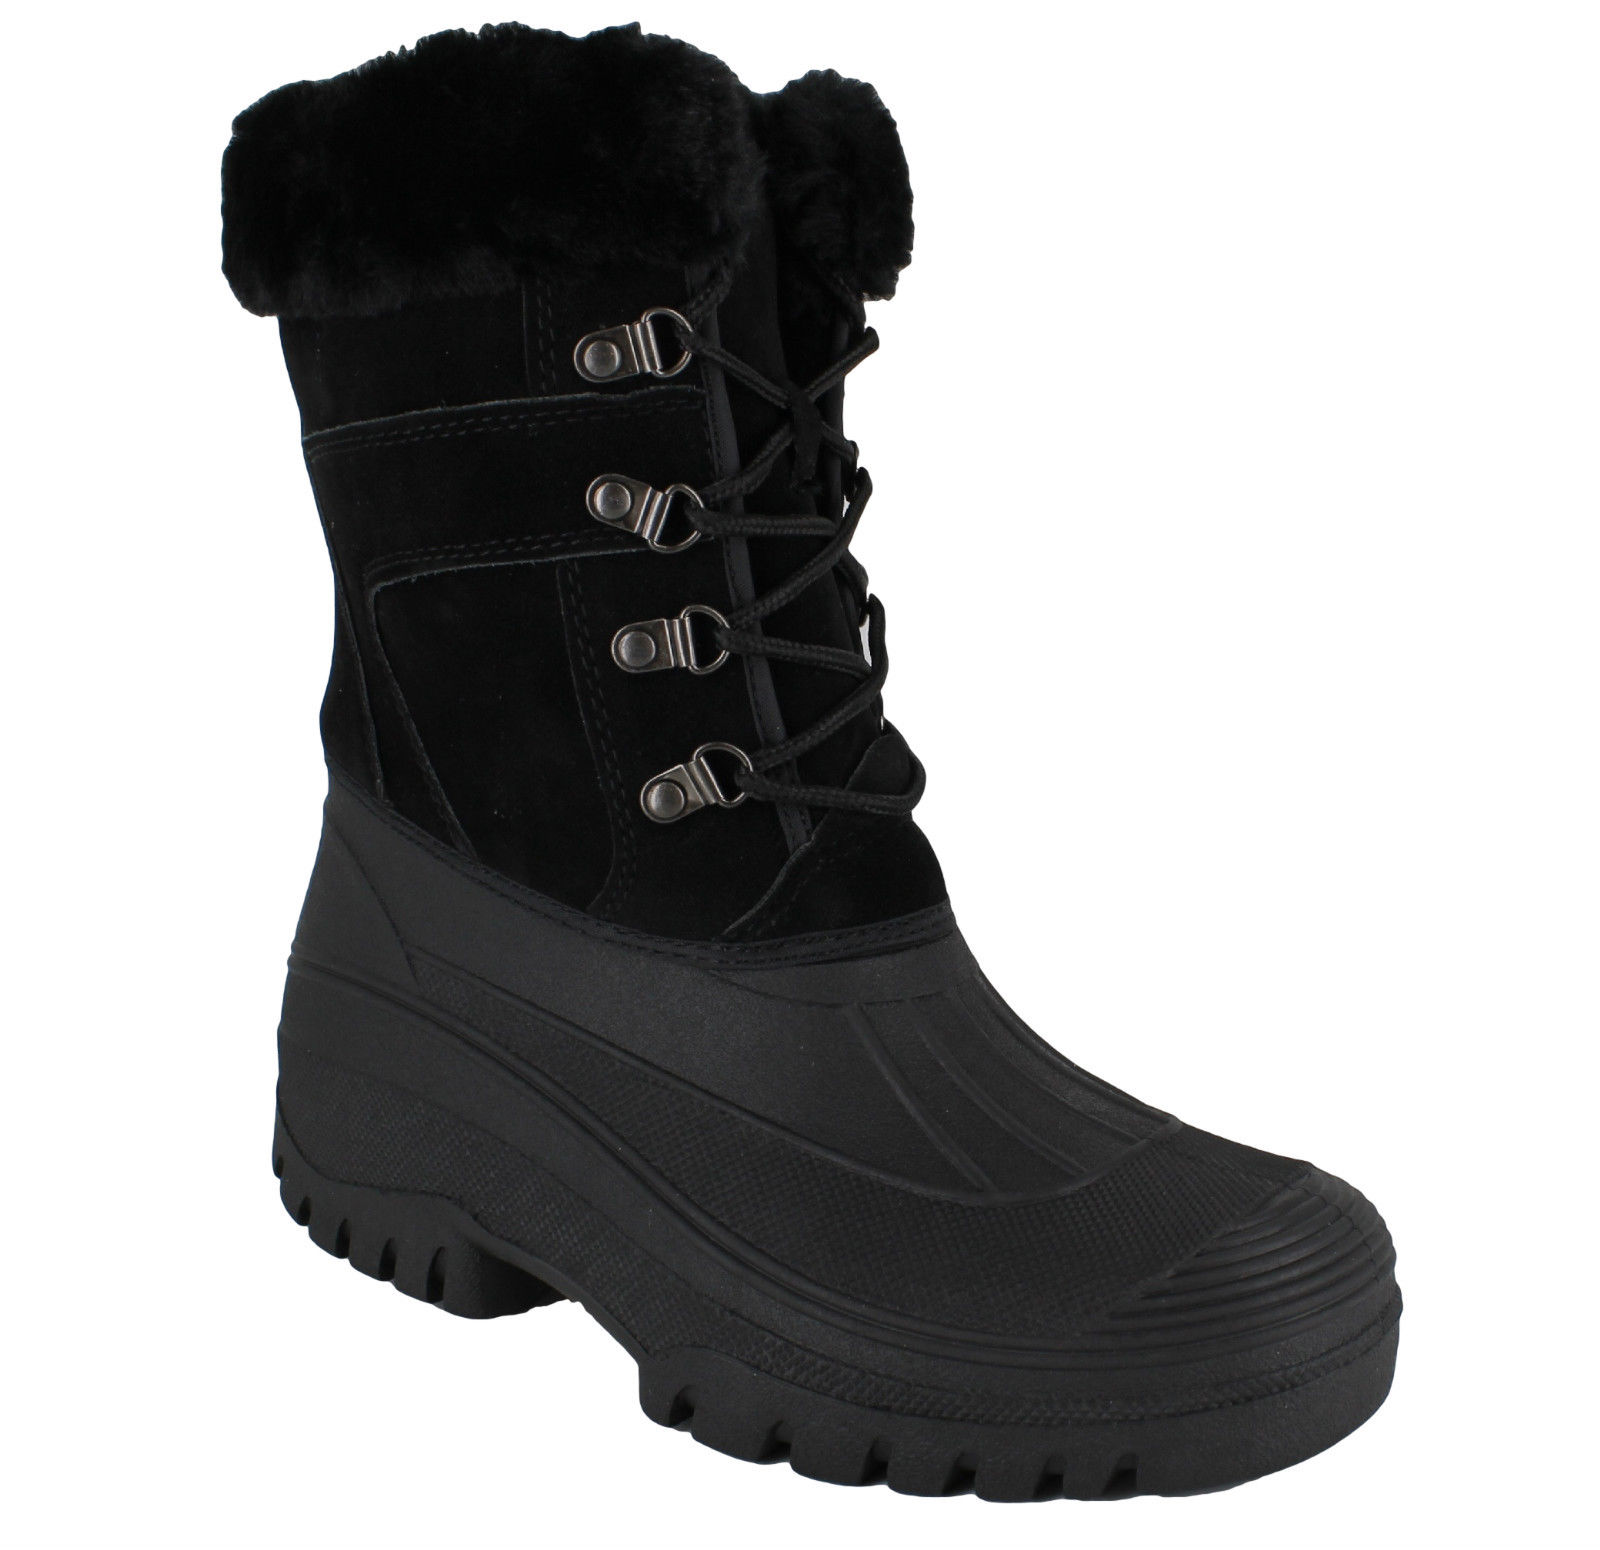 Womens GroundWork Mukker Stable Yard Winter Snow Lace Up Boots Sizes 4 to 8